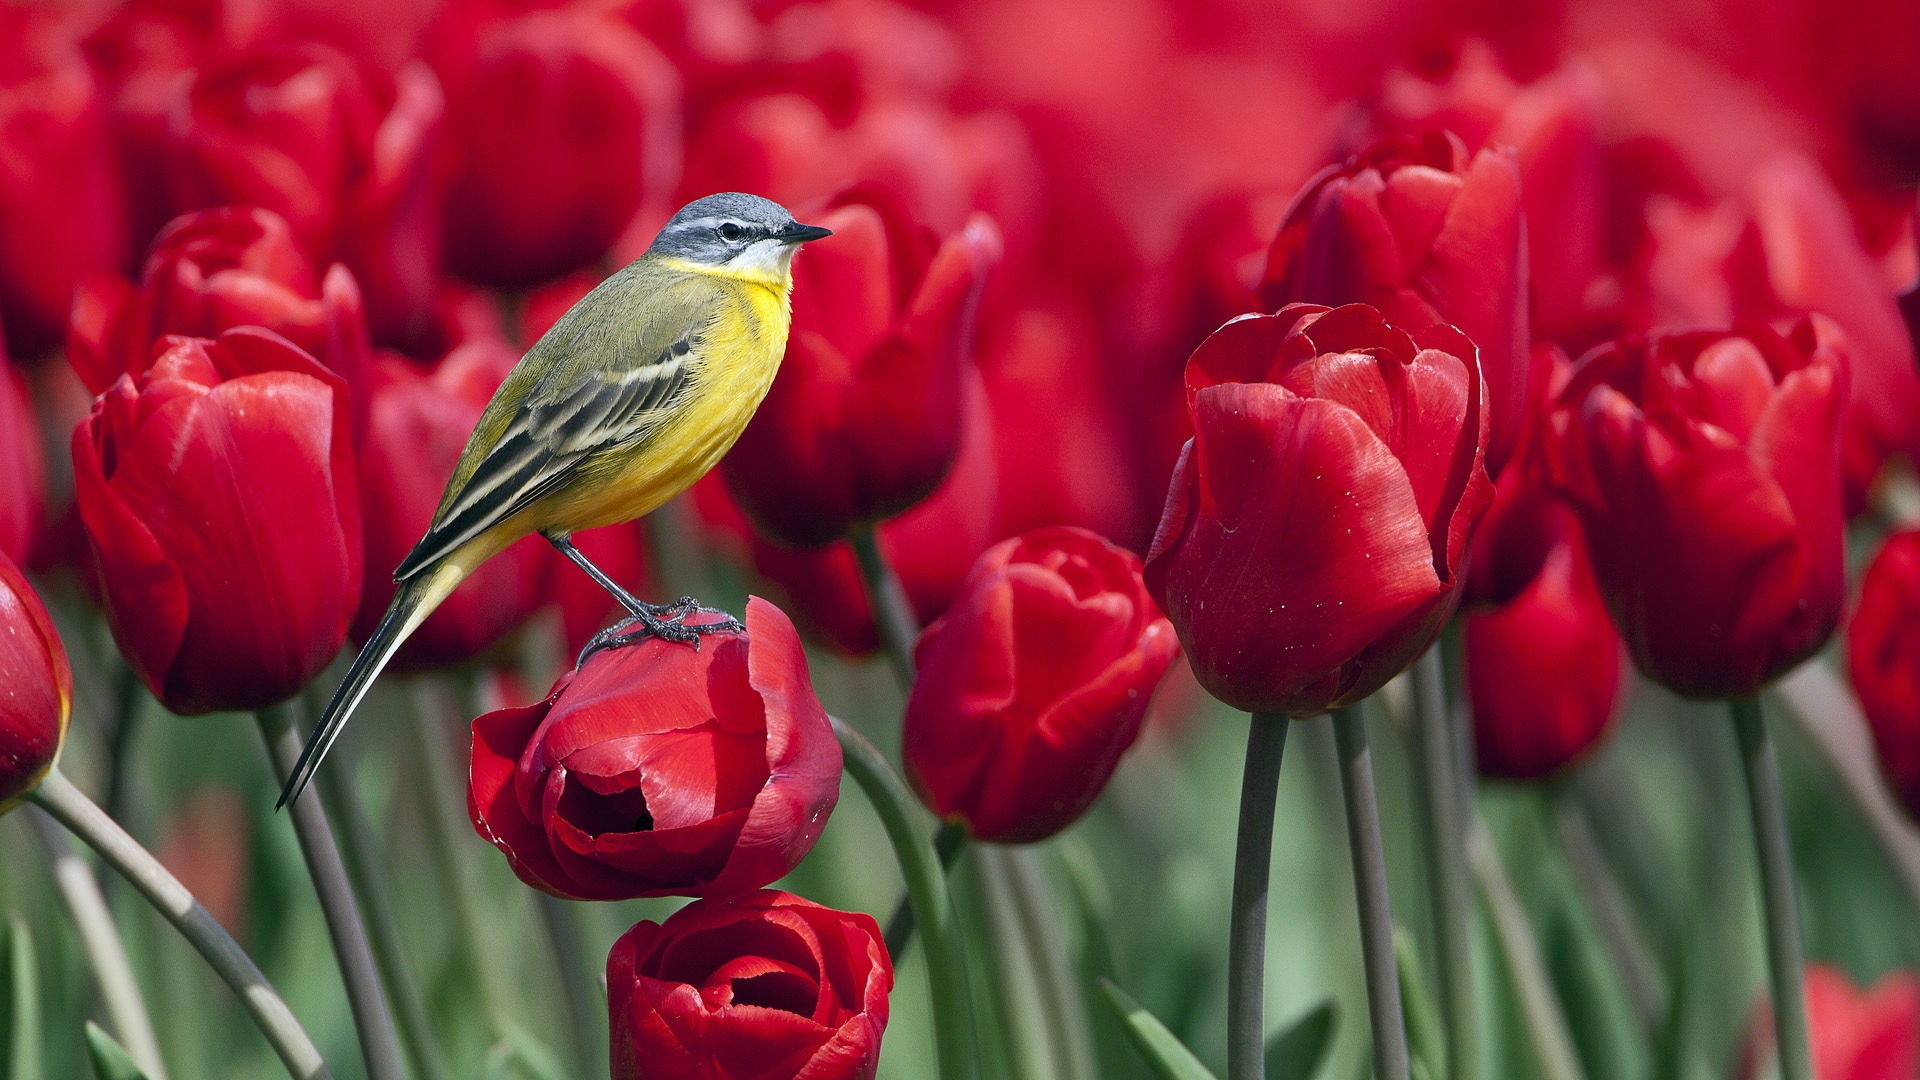 wallpaper of birds and flowers which is under the birds wallpapers